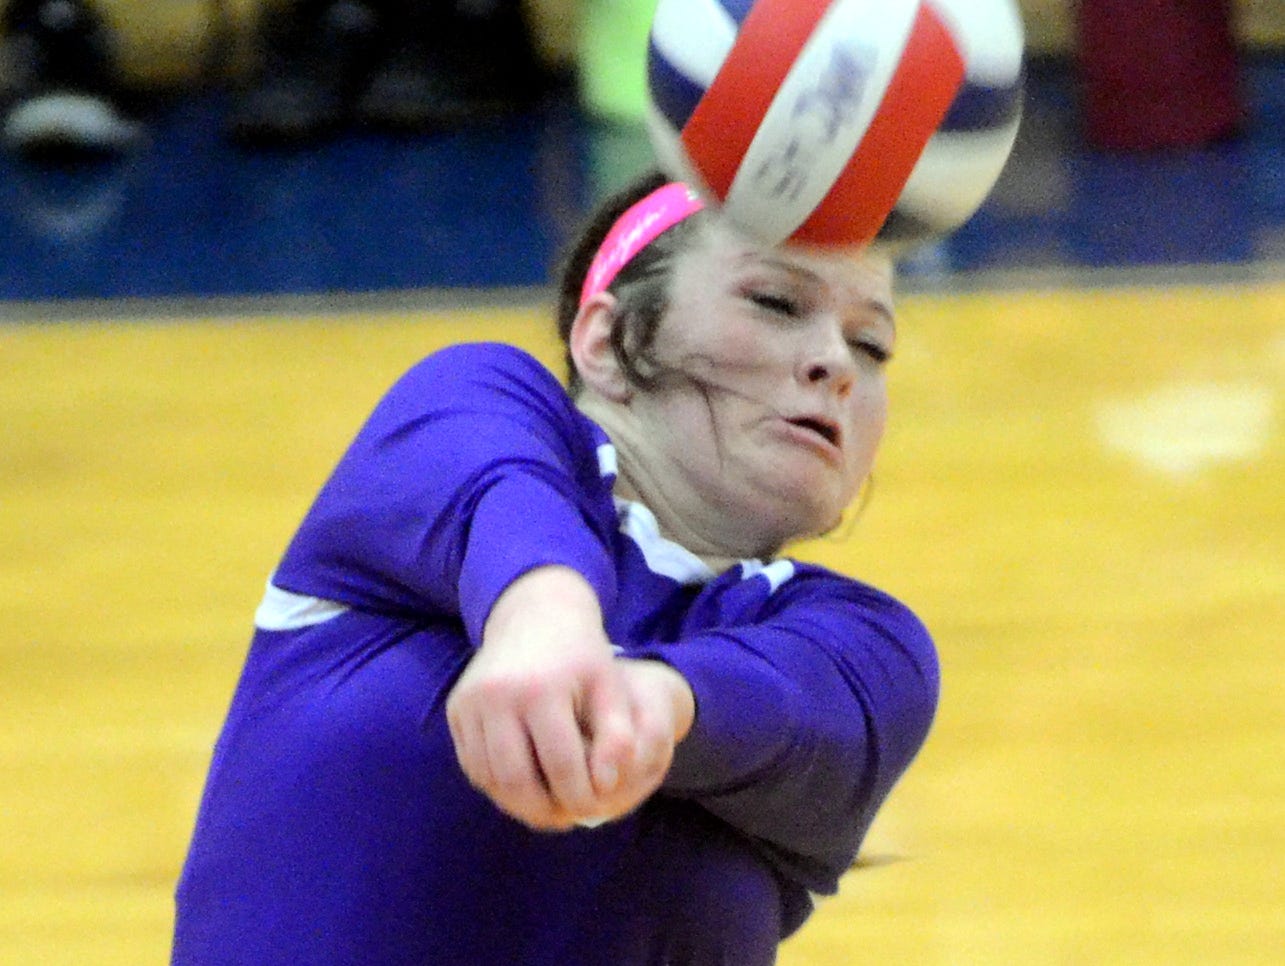 Portland High senior Abby Akins passes a serve during the third game.